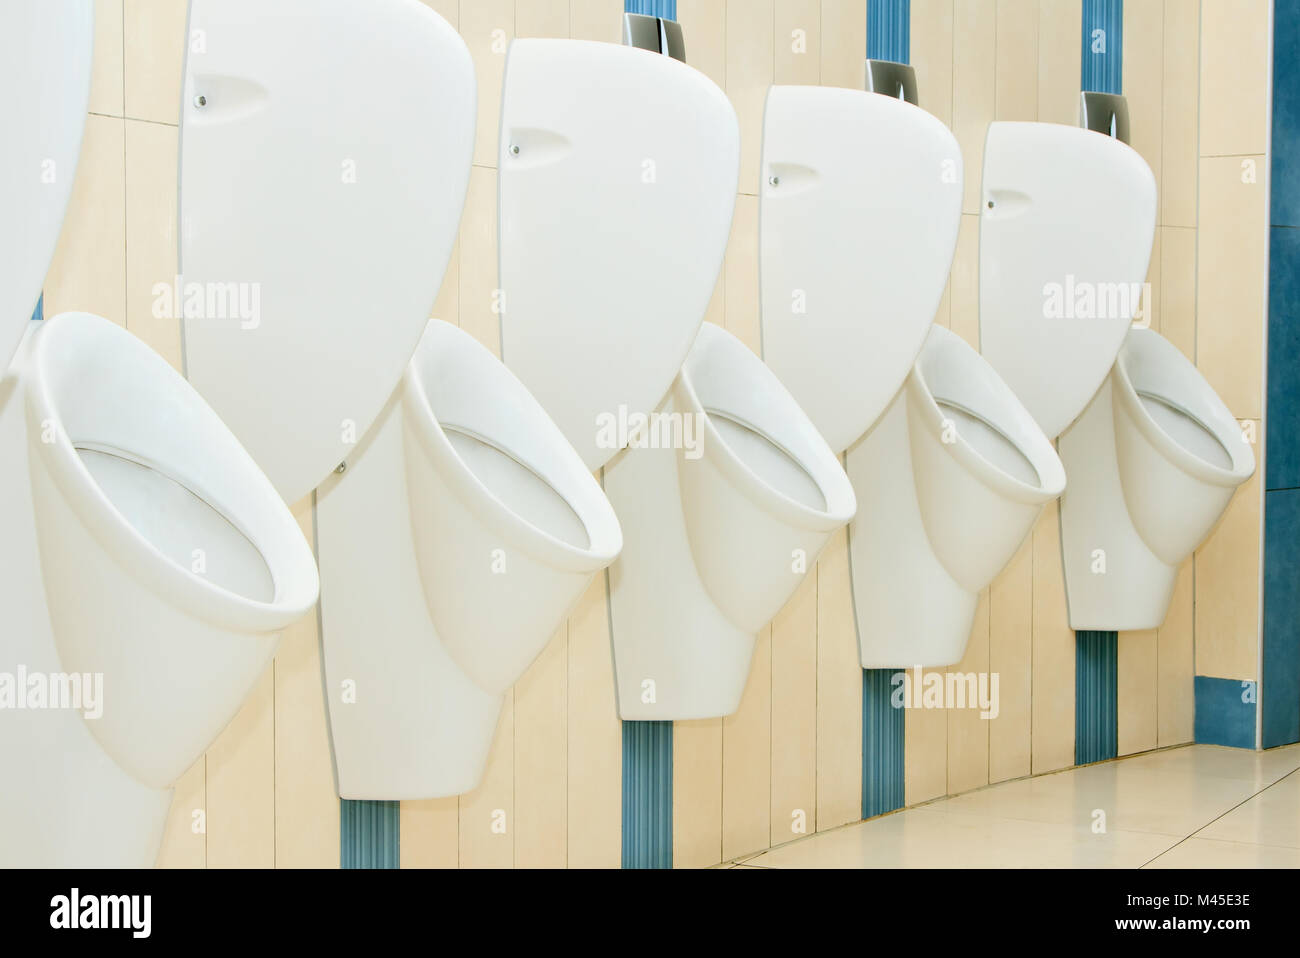 modern restroom interior with urinal row Stock Photo